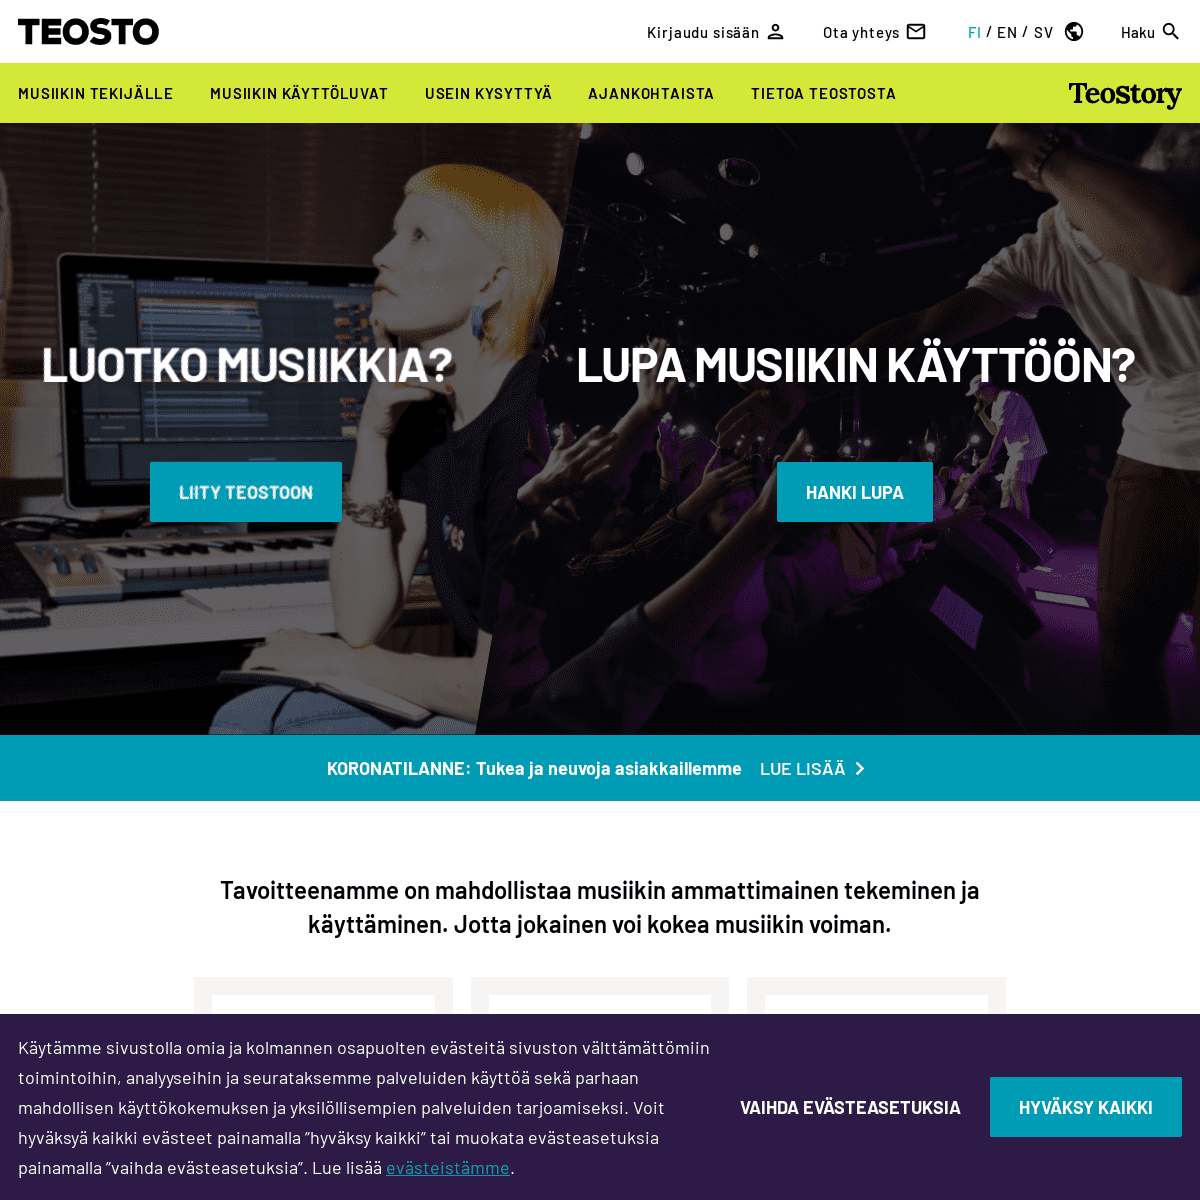 A complete backup of https://teosto.fi